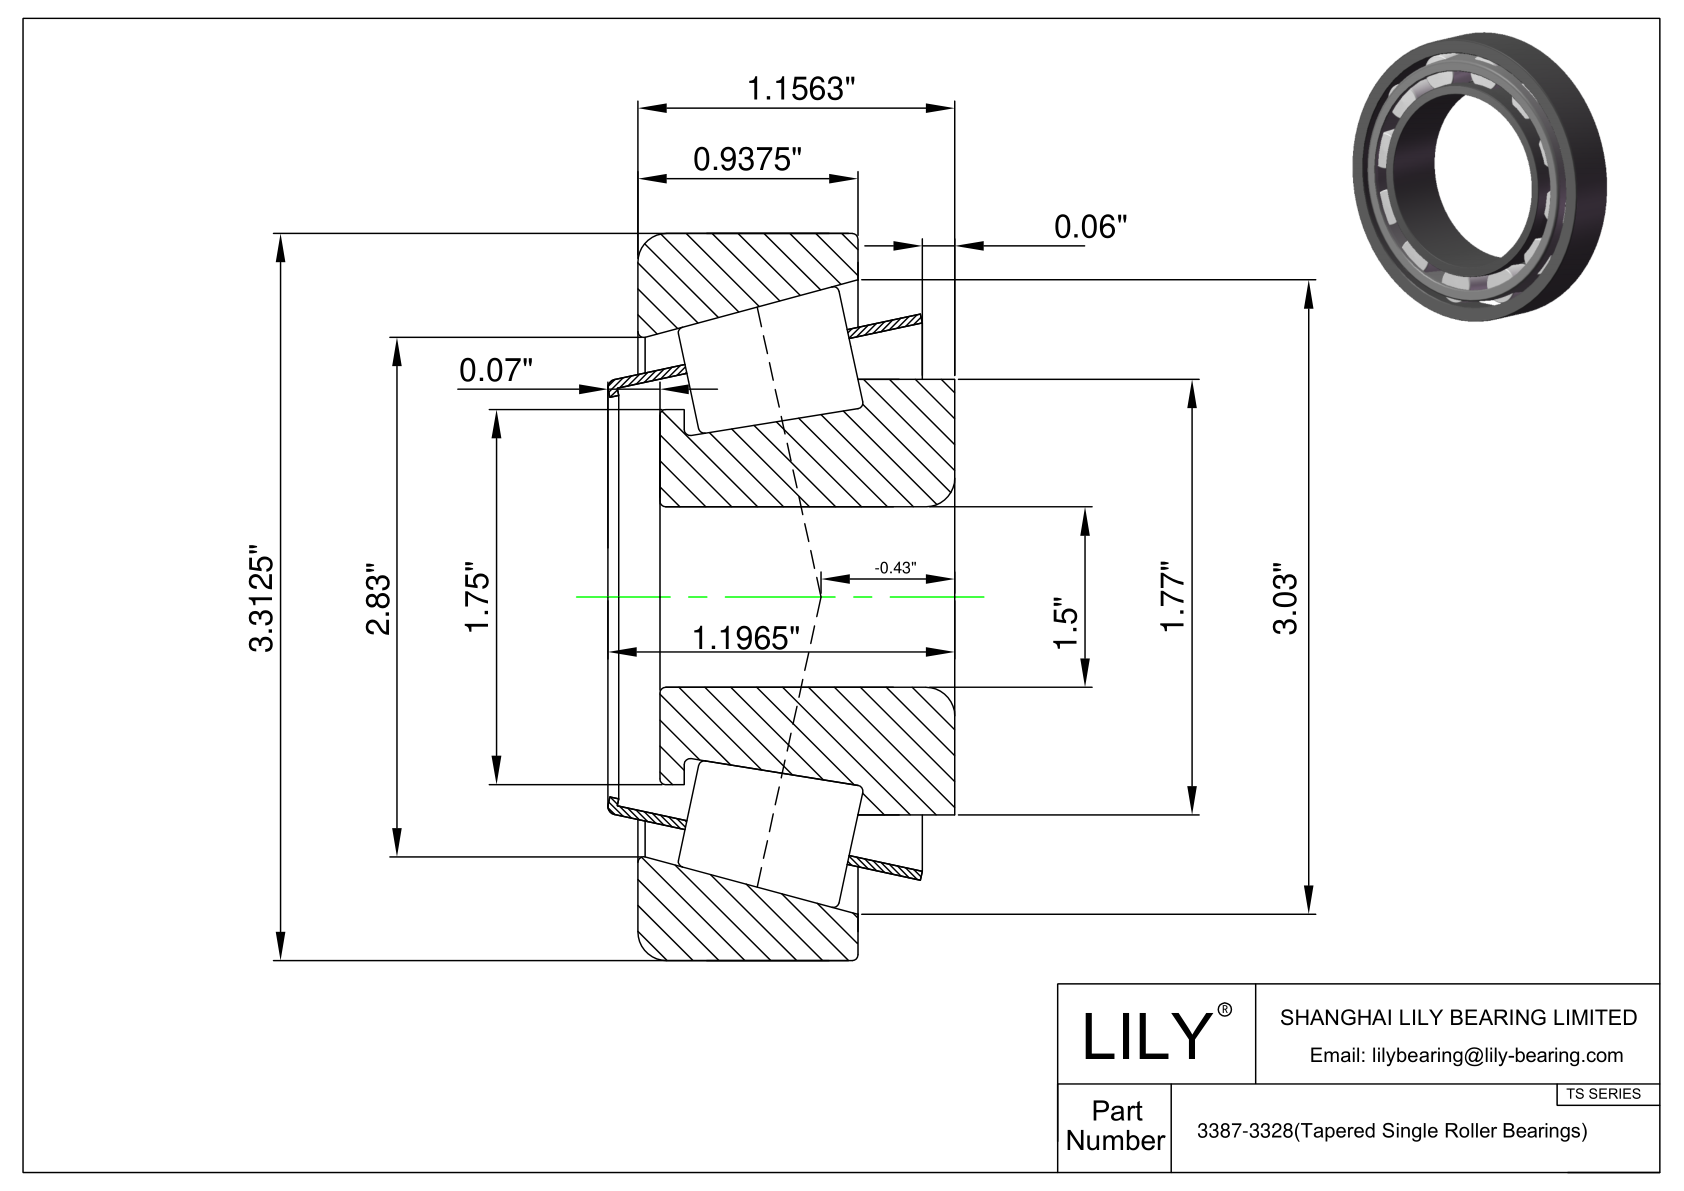 3387-3328 TS (Tapered Single Roller Bearings) (Imperial) cad drawing